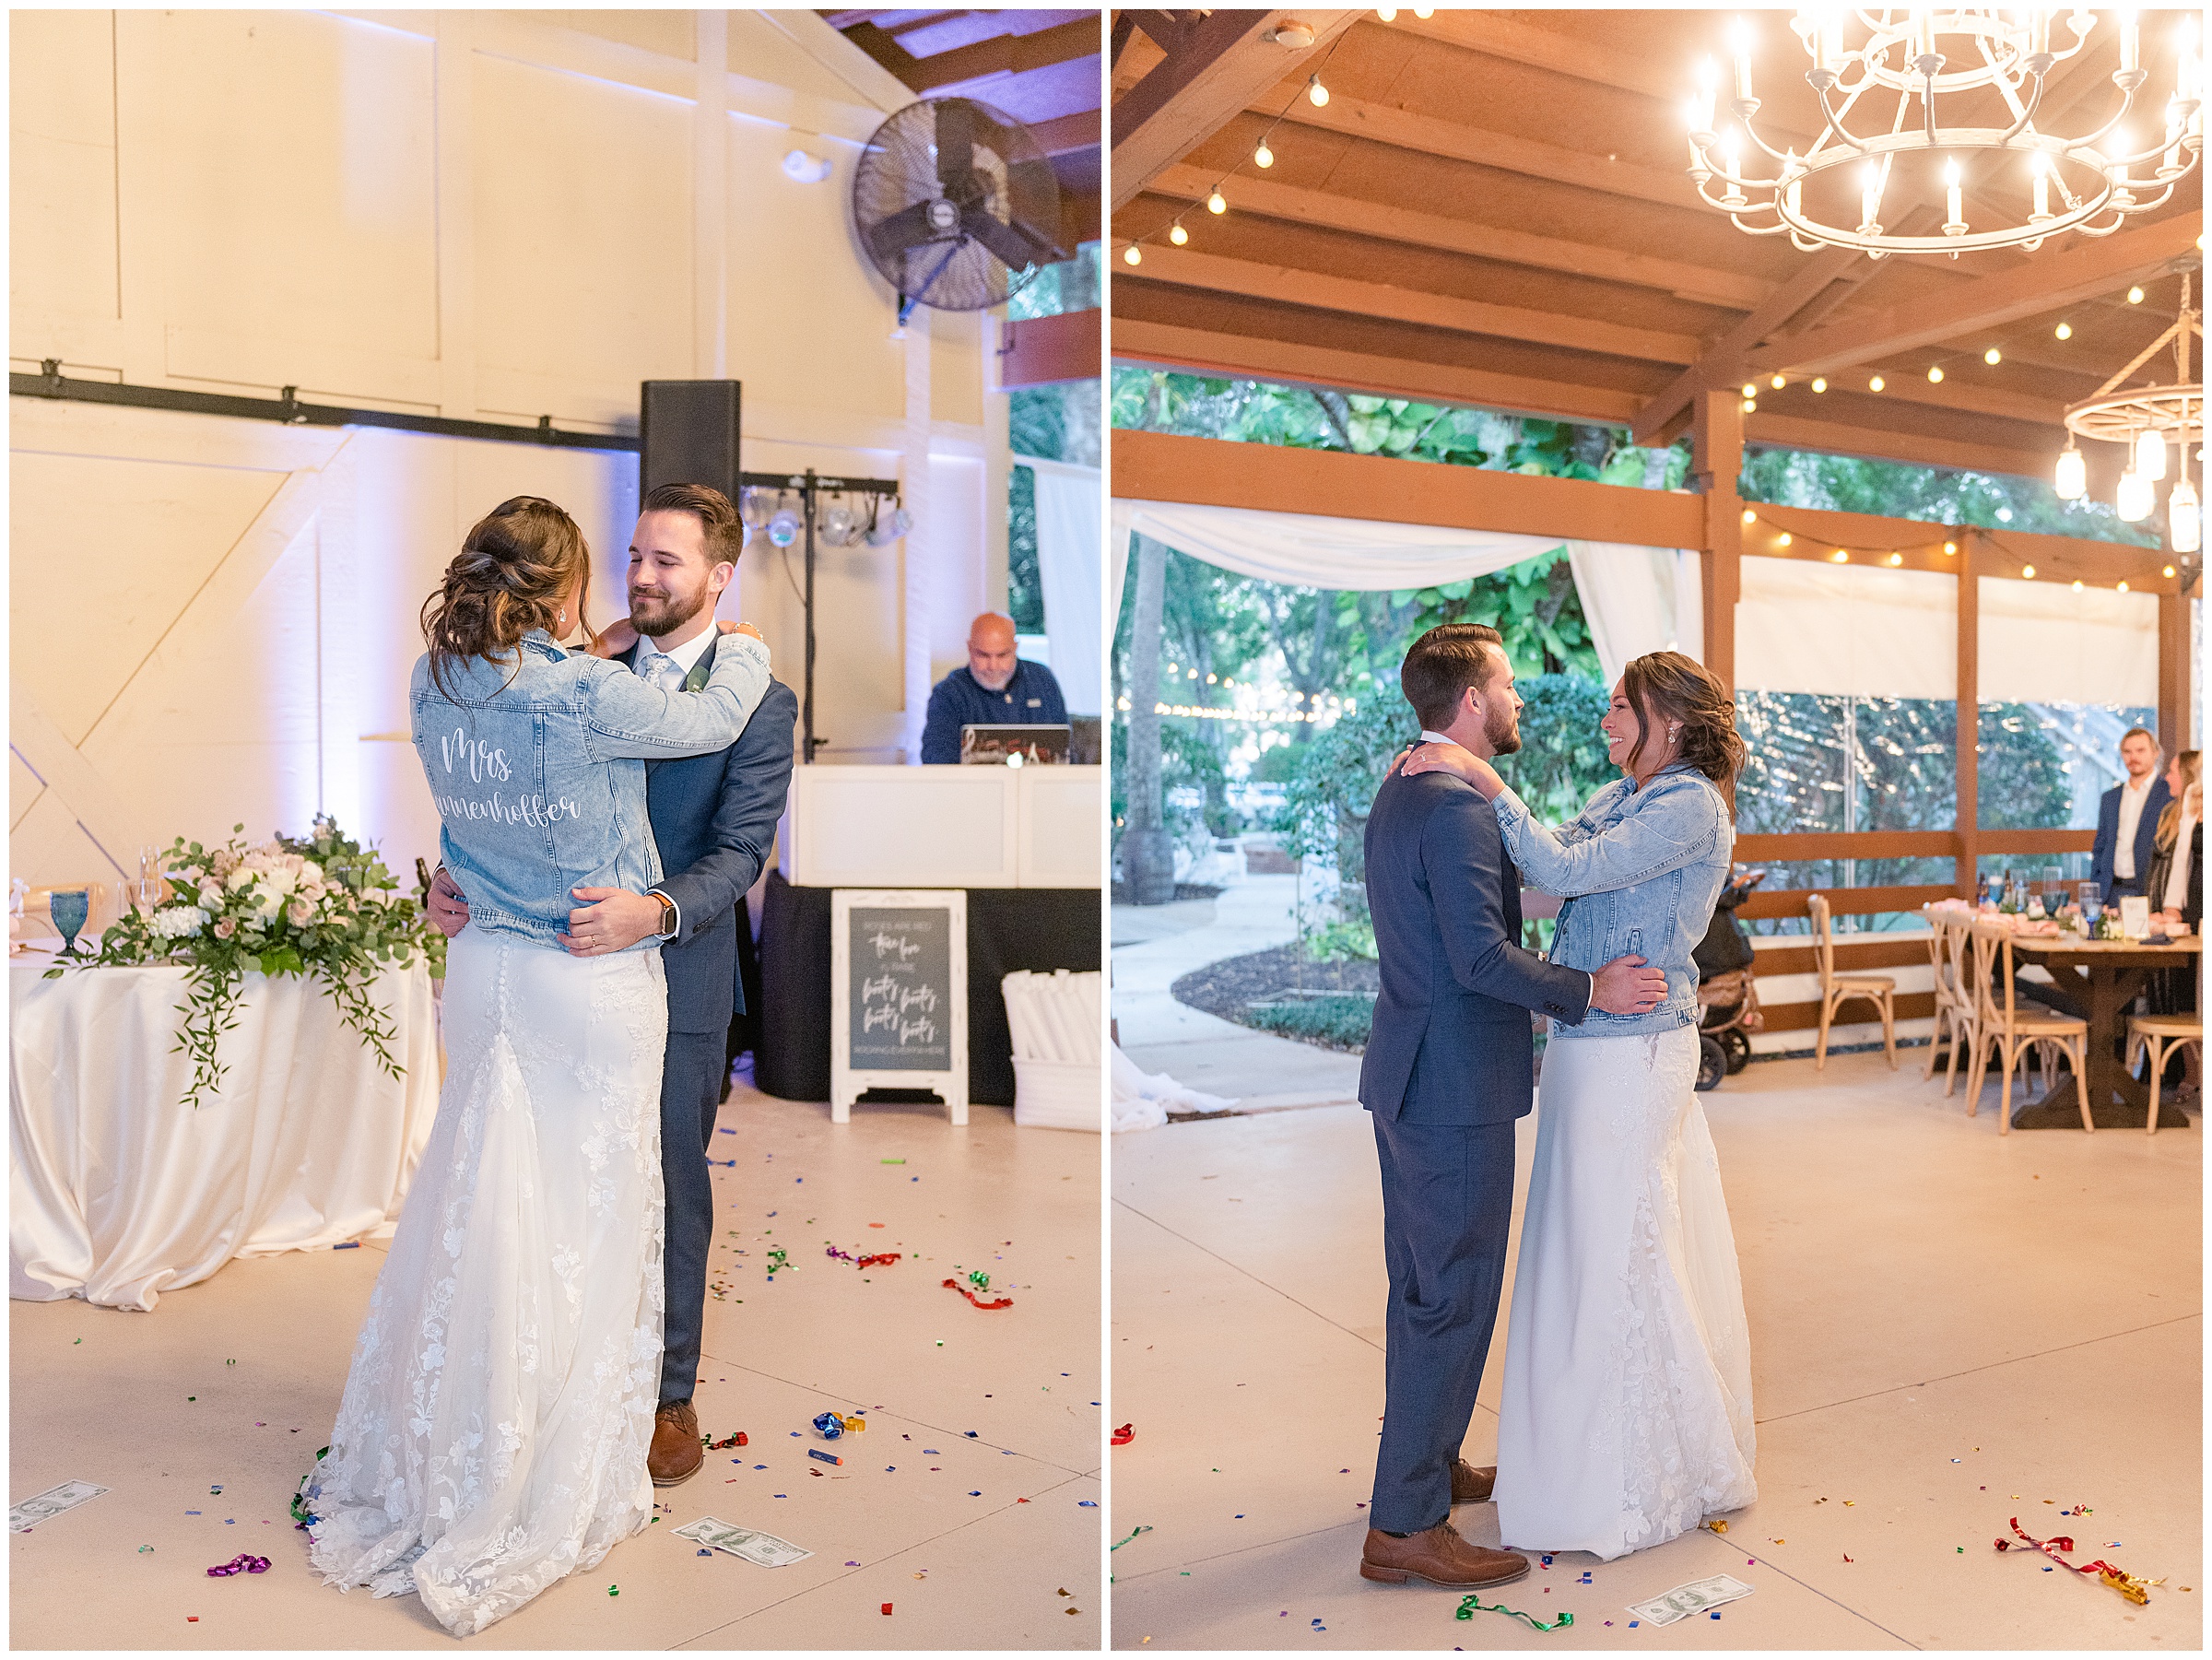 Bride and groom sharing their first dance at their Magnolia Manor Wedding in Vero Beach